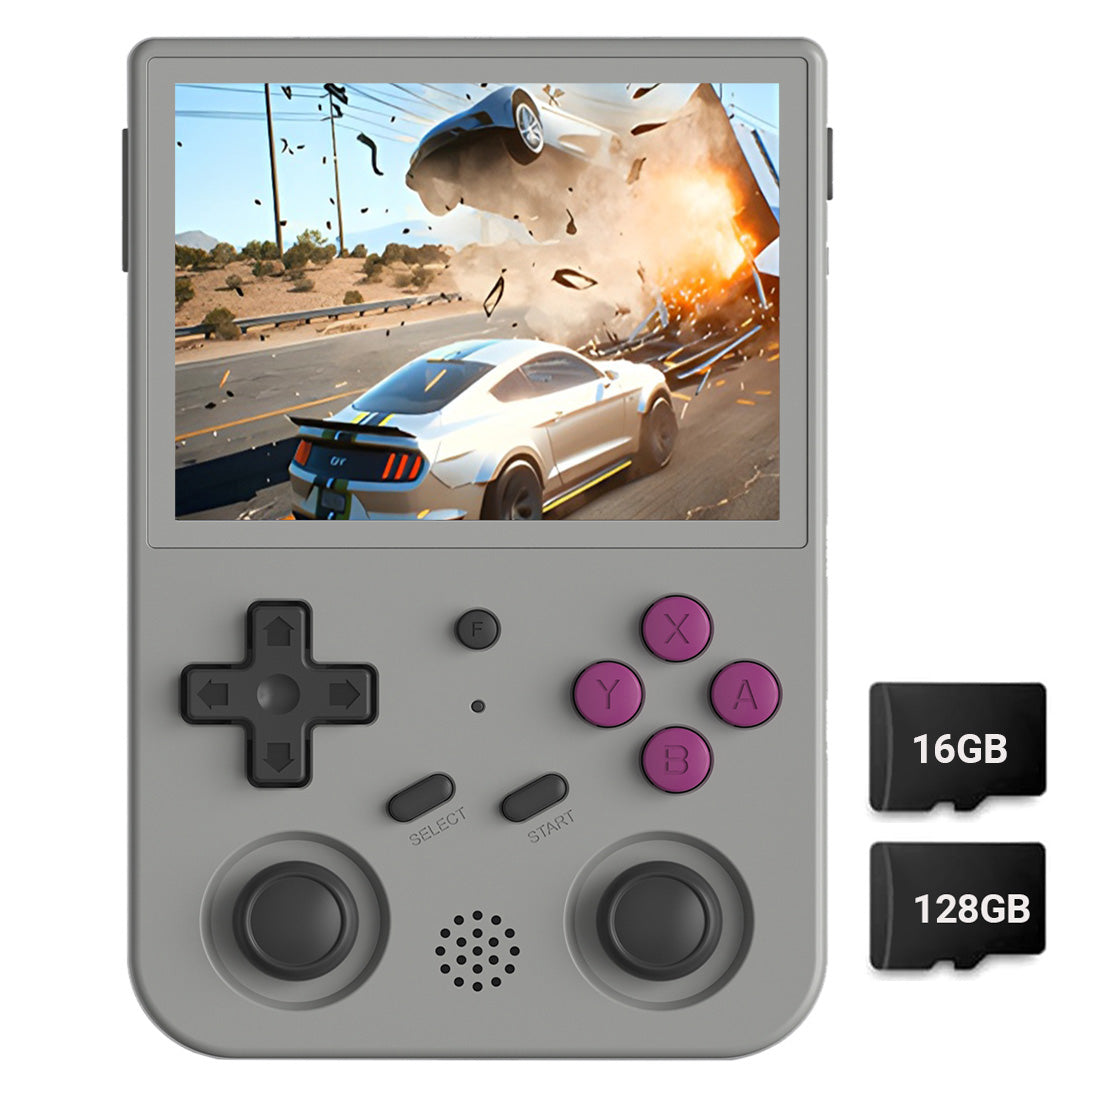 RG353V Handheld Game Console Support Dual OS Android 11+ Linux